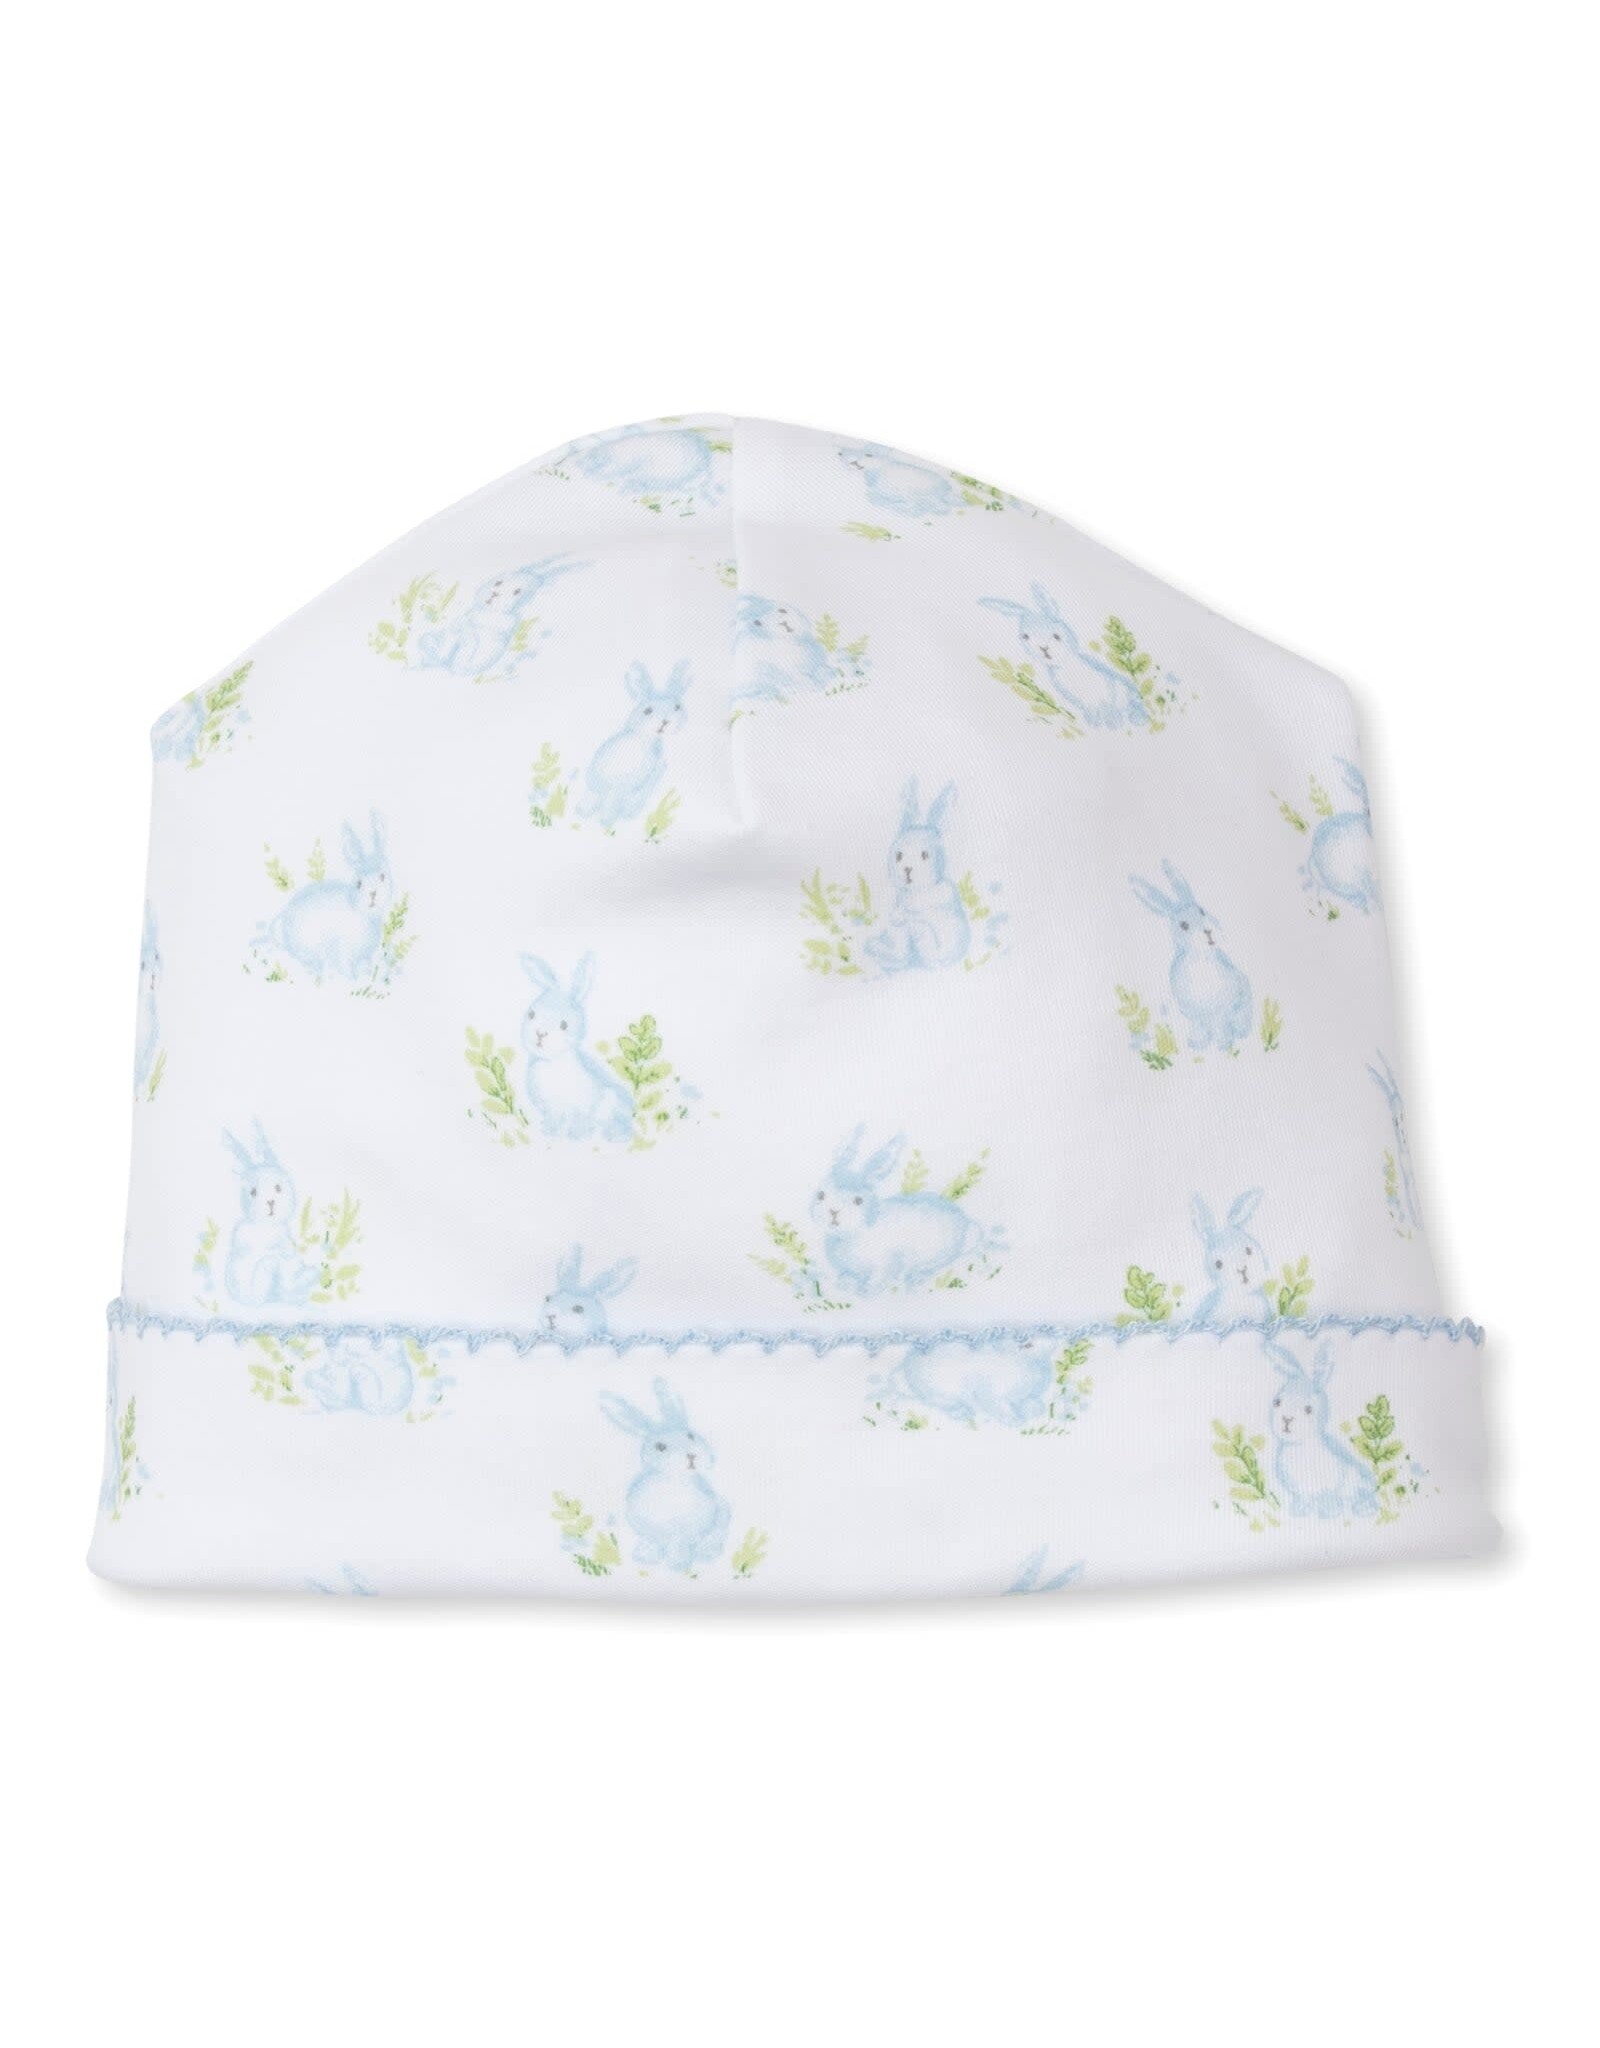 Kissy Kissy Blue Cottontail Hollow Hat